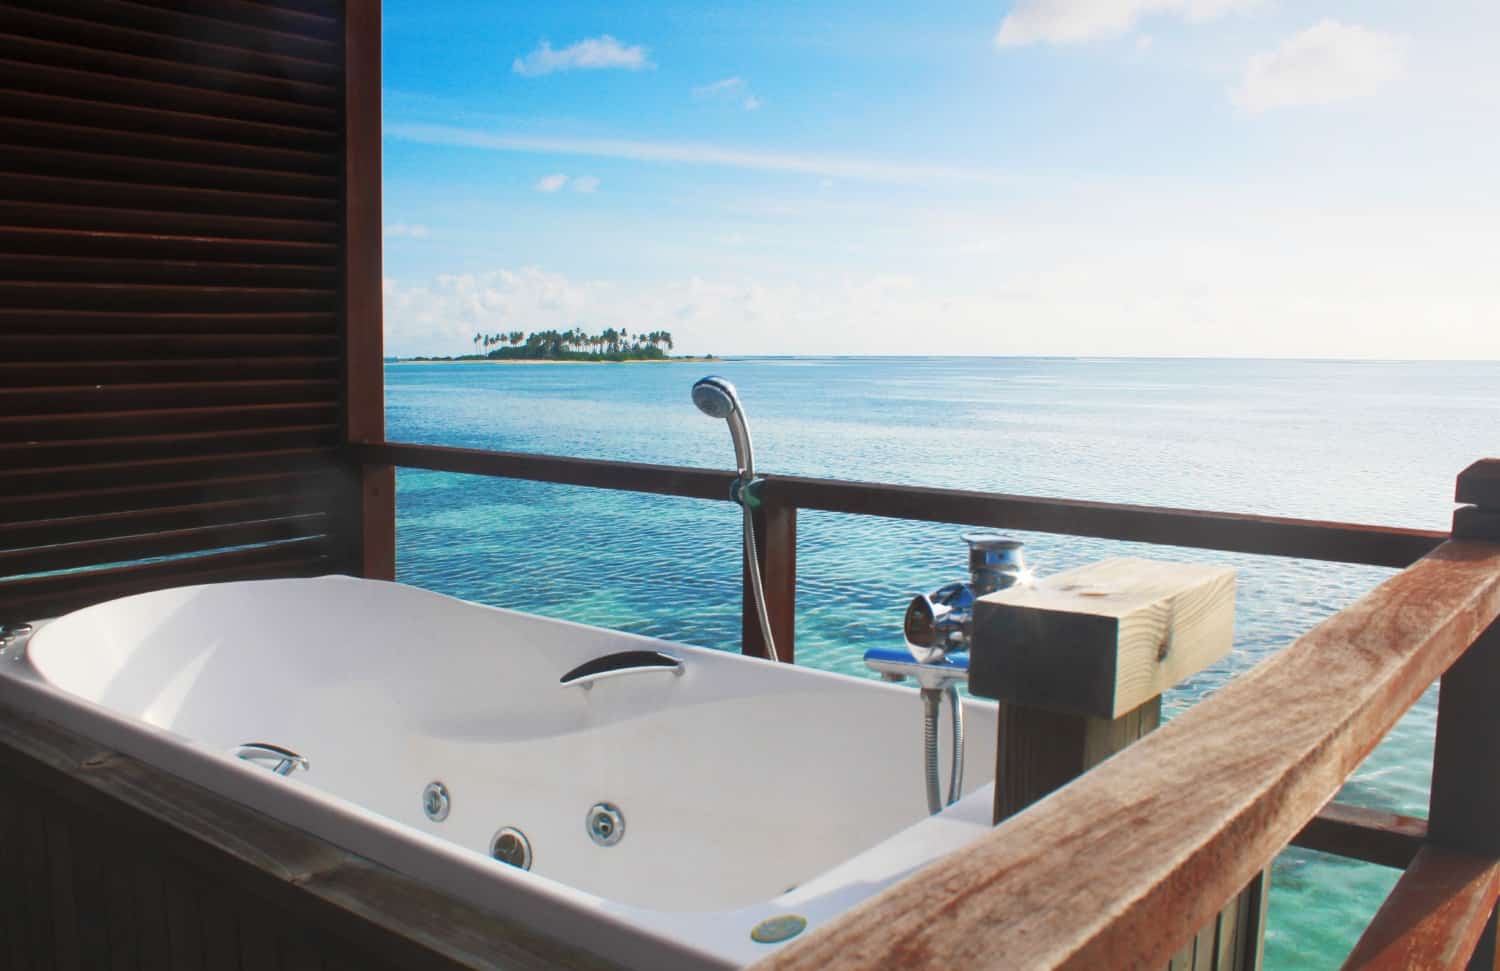 Jacuzzi in the Maldives